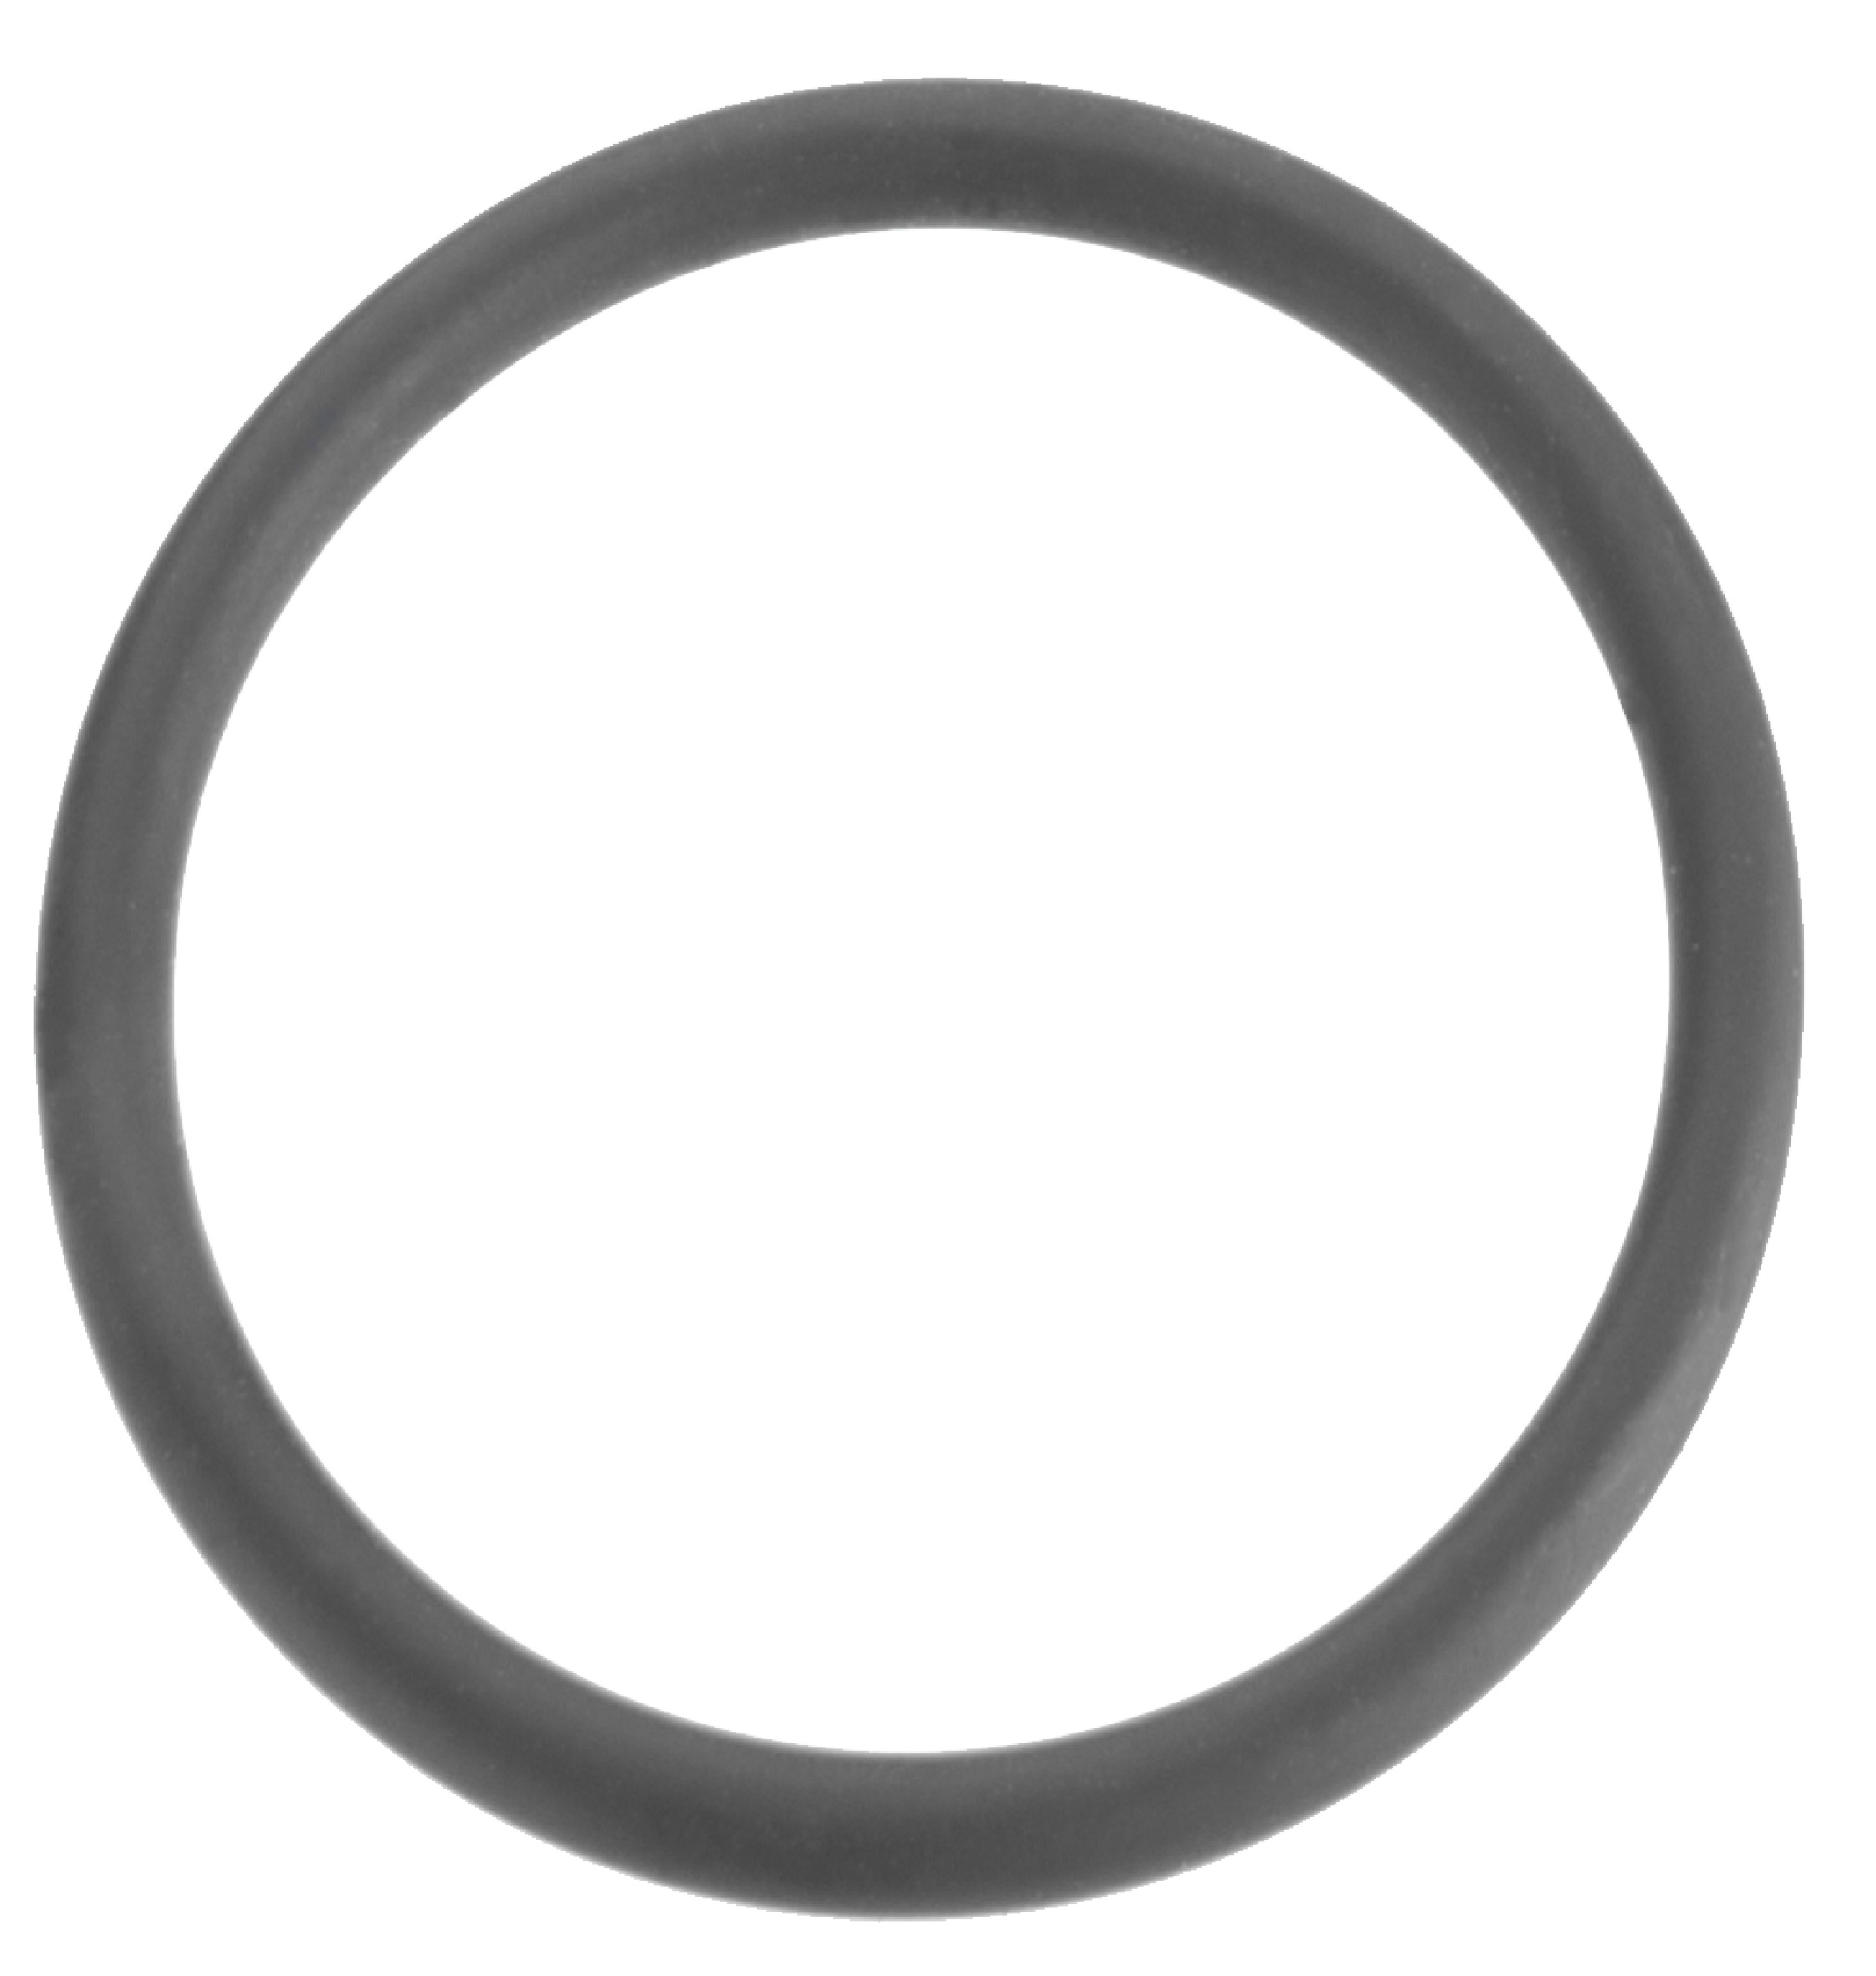   O-RING F.WT-EXCENTERSTOPF. 33X3(1)